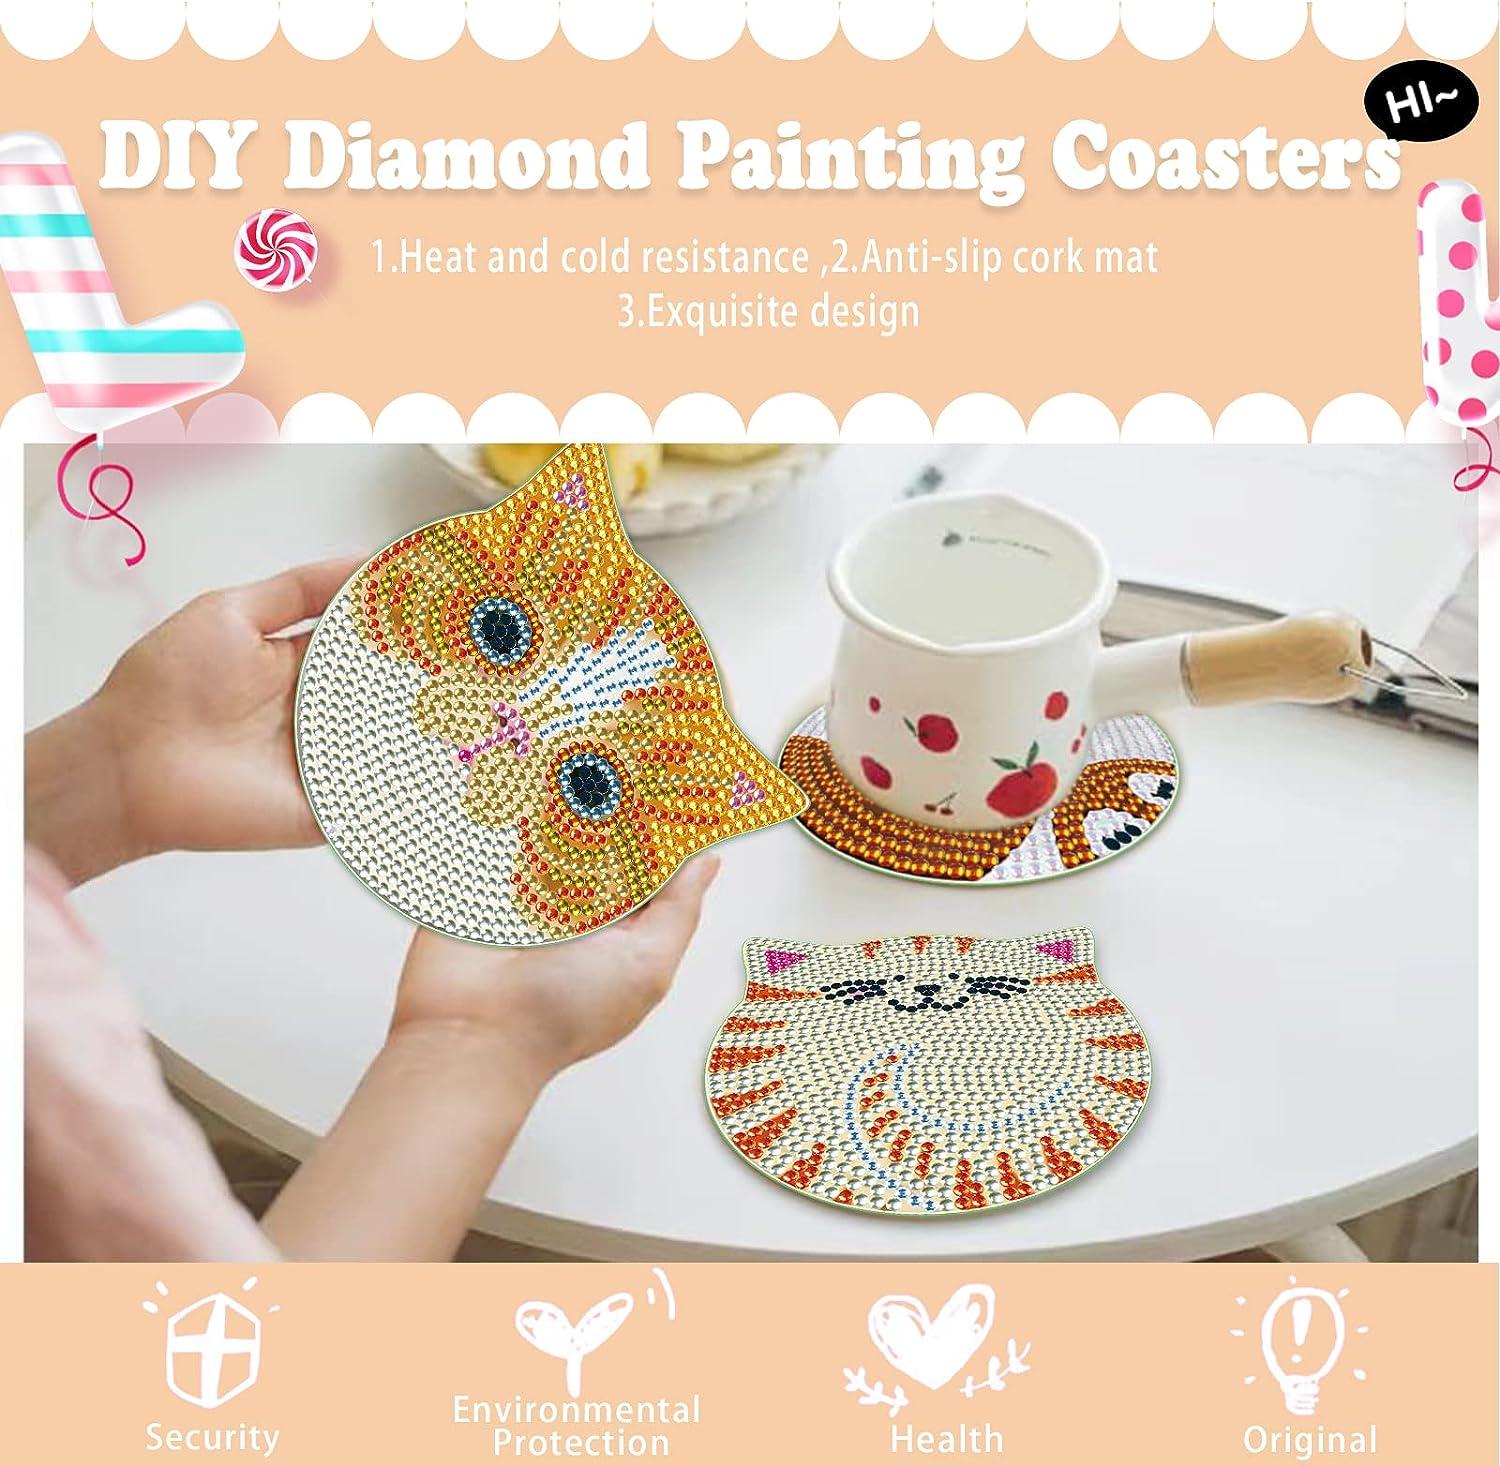 MVVMTOP 6 Pcs Diamond Painting Coasters with Dimensional Holder DIY Cat  Coaster Diamond Art Kits Non-Slip Coaster for Beginners Kids and Adults Art  Craft Supplies Face Cat